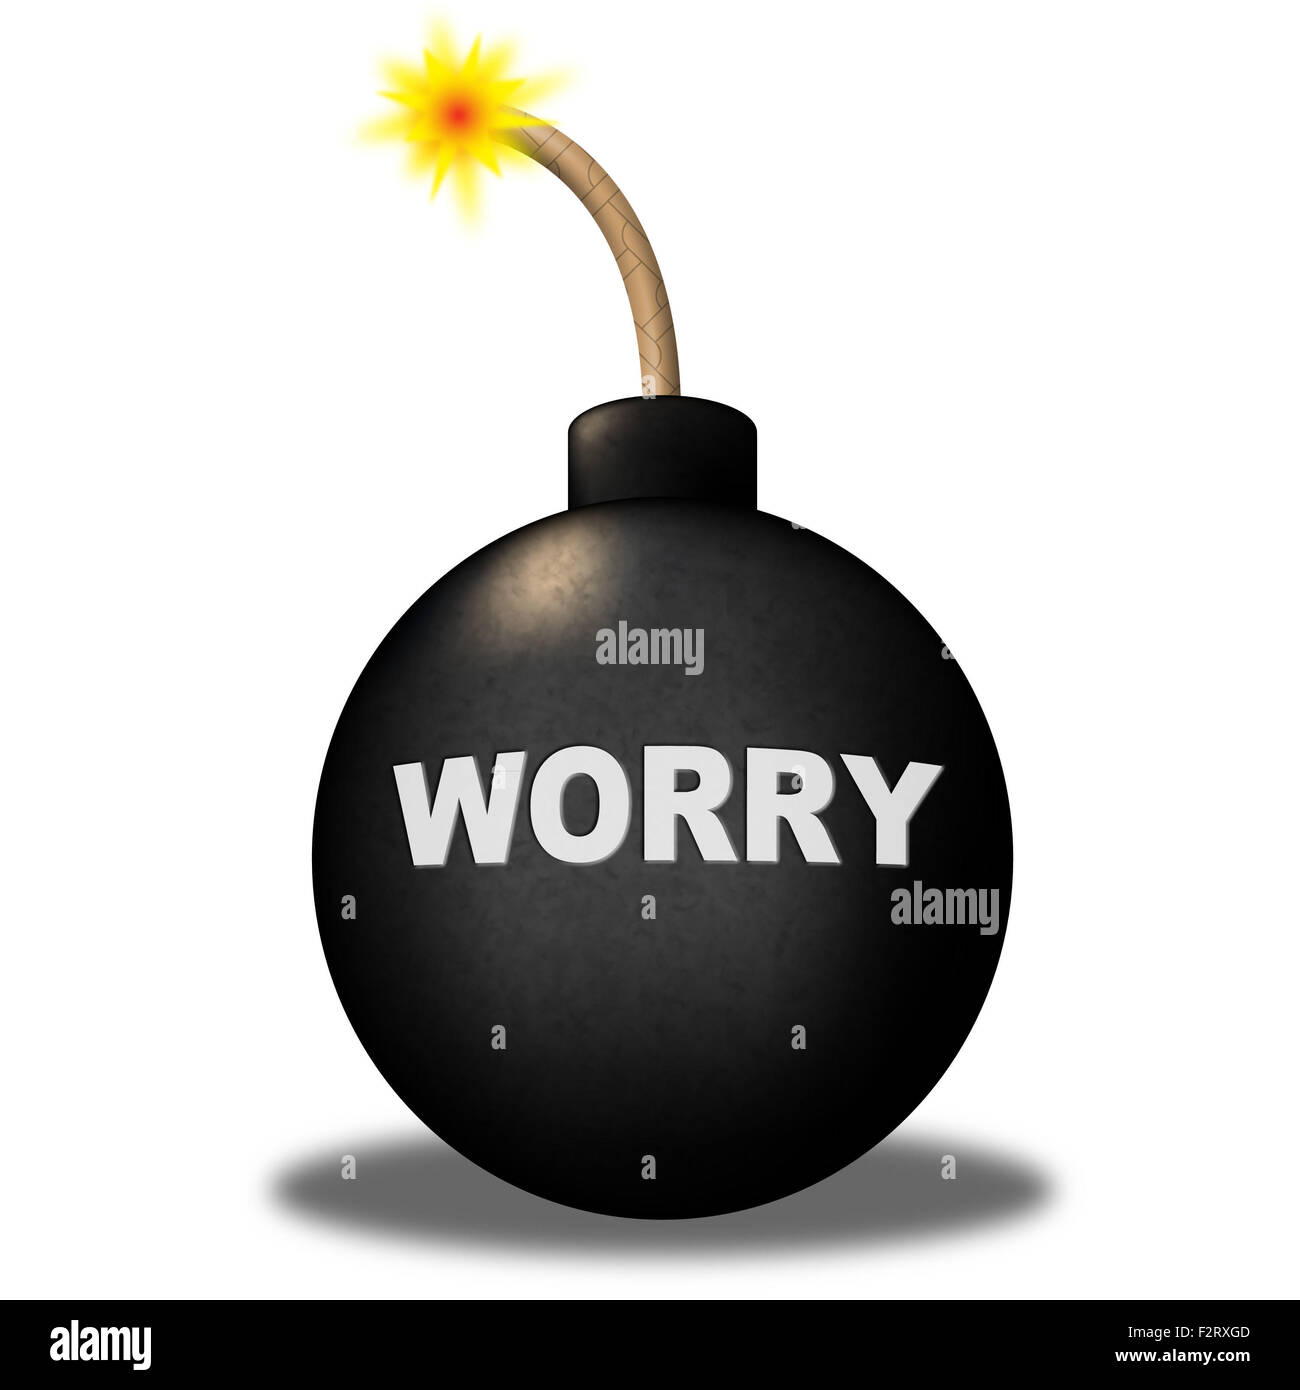 Worry Alert Indicating Angst Afraid And Dangerous Stock Photo